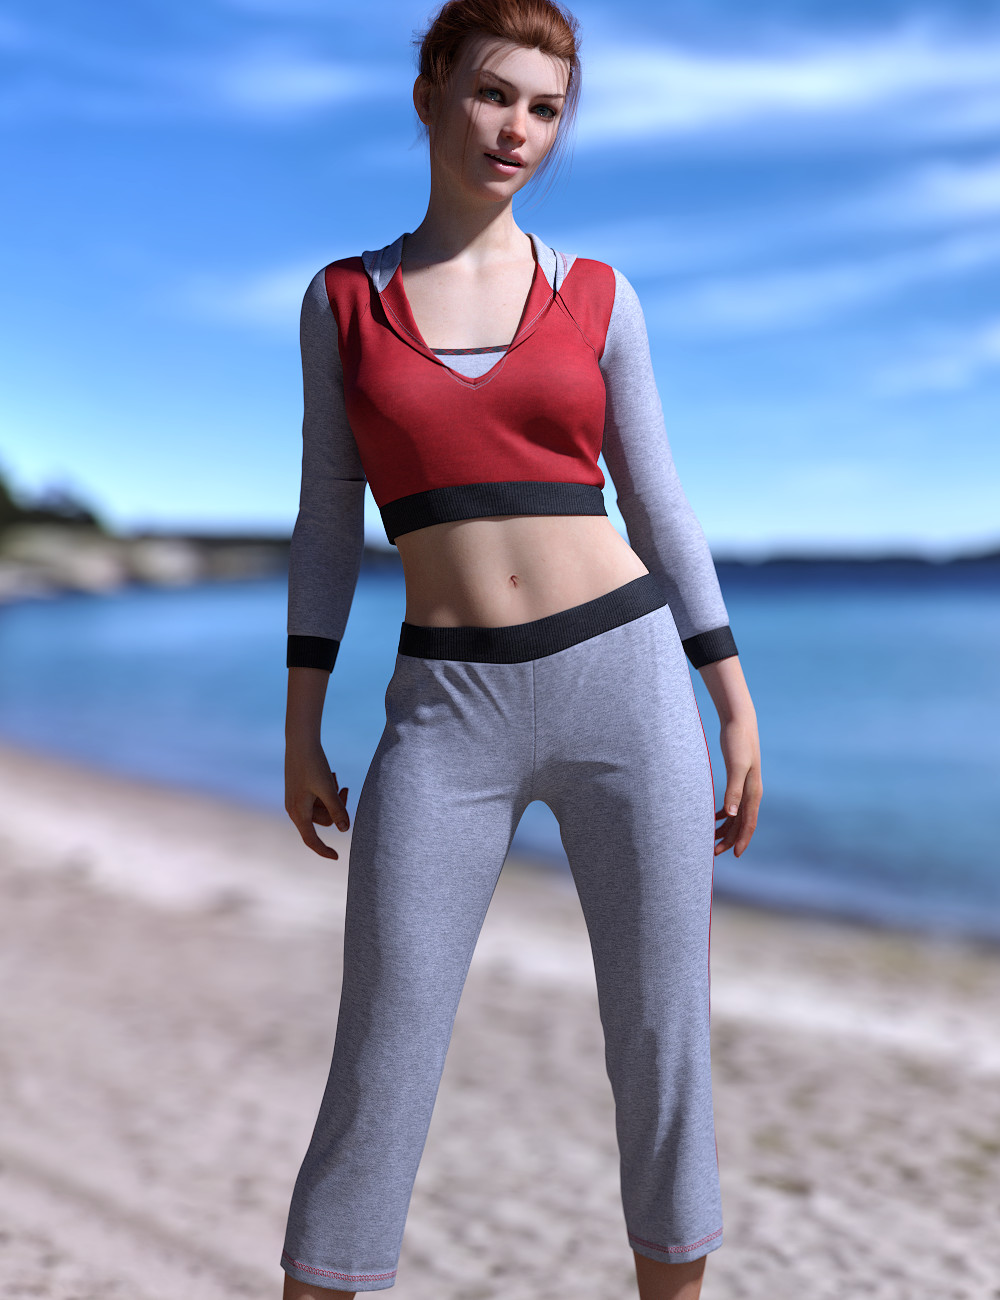 dForce Summer Fit Outfit for Genesis 8 and 8.1 Female (Repost)